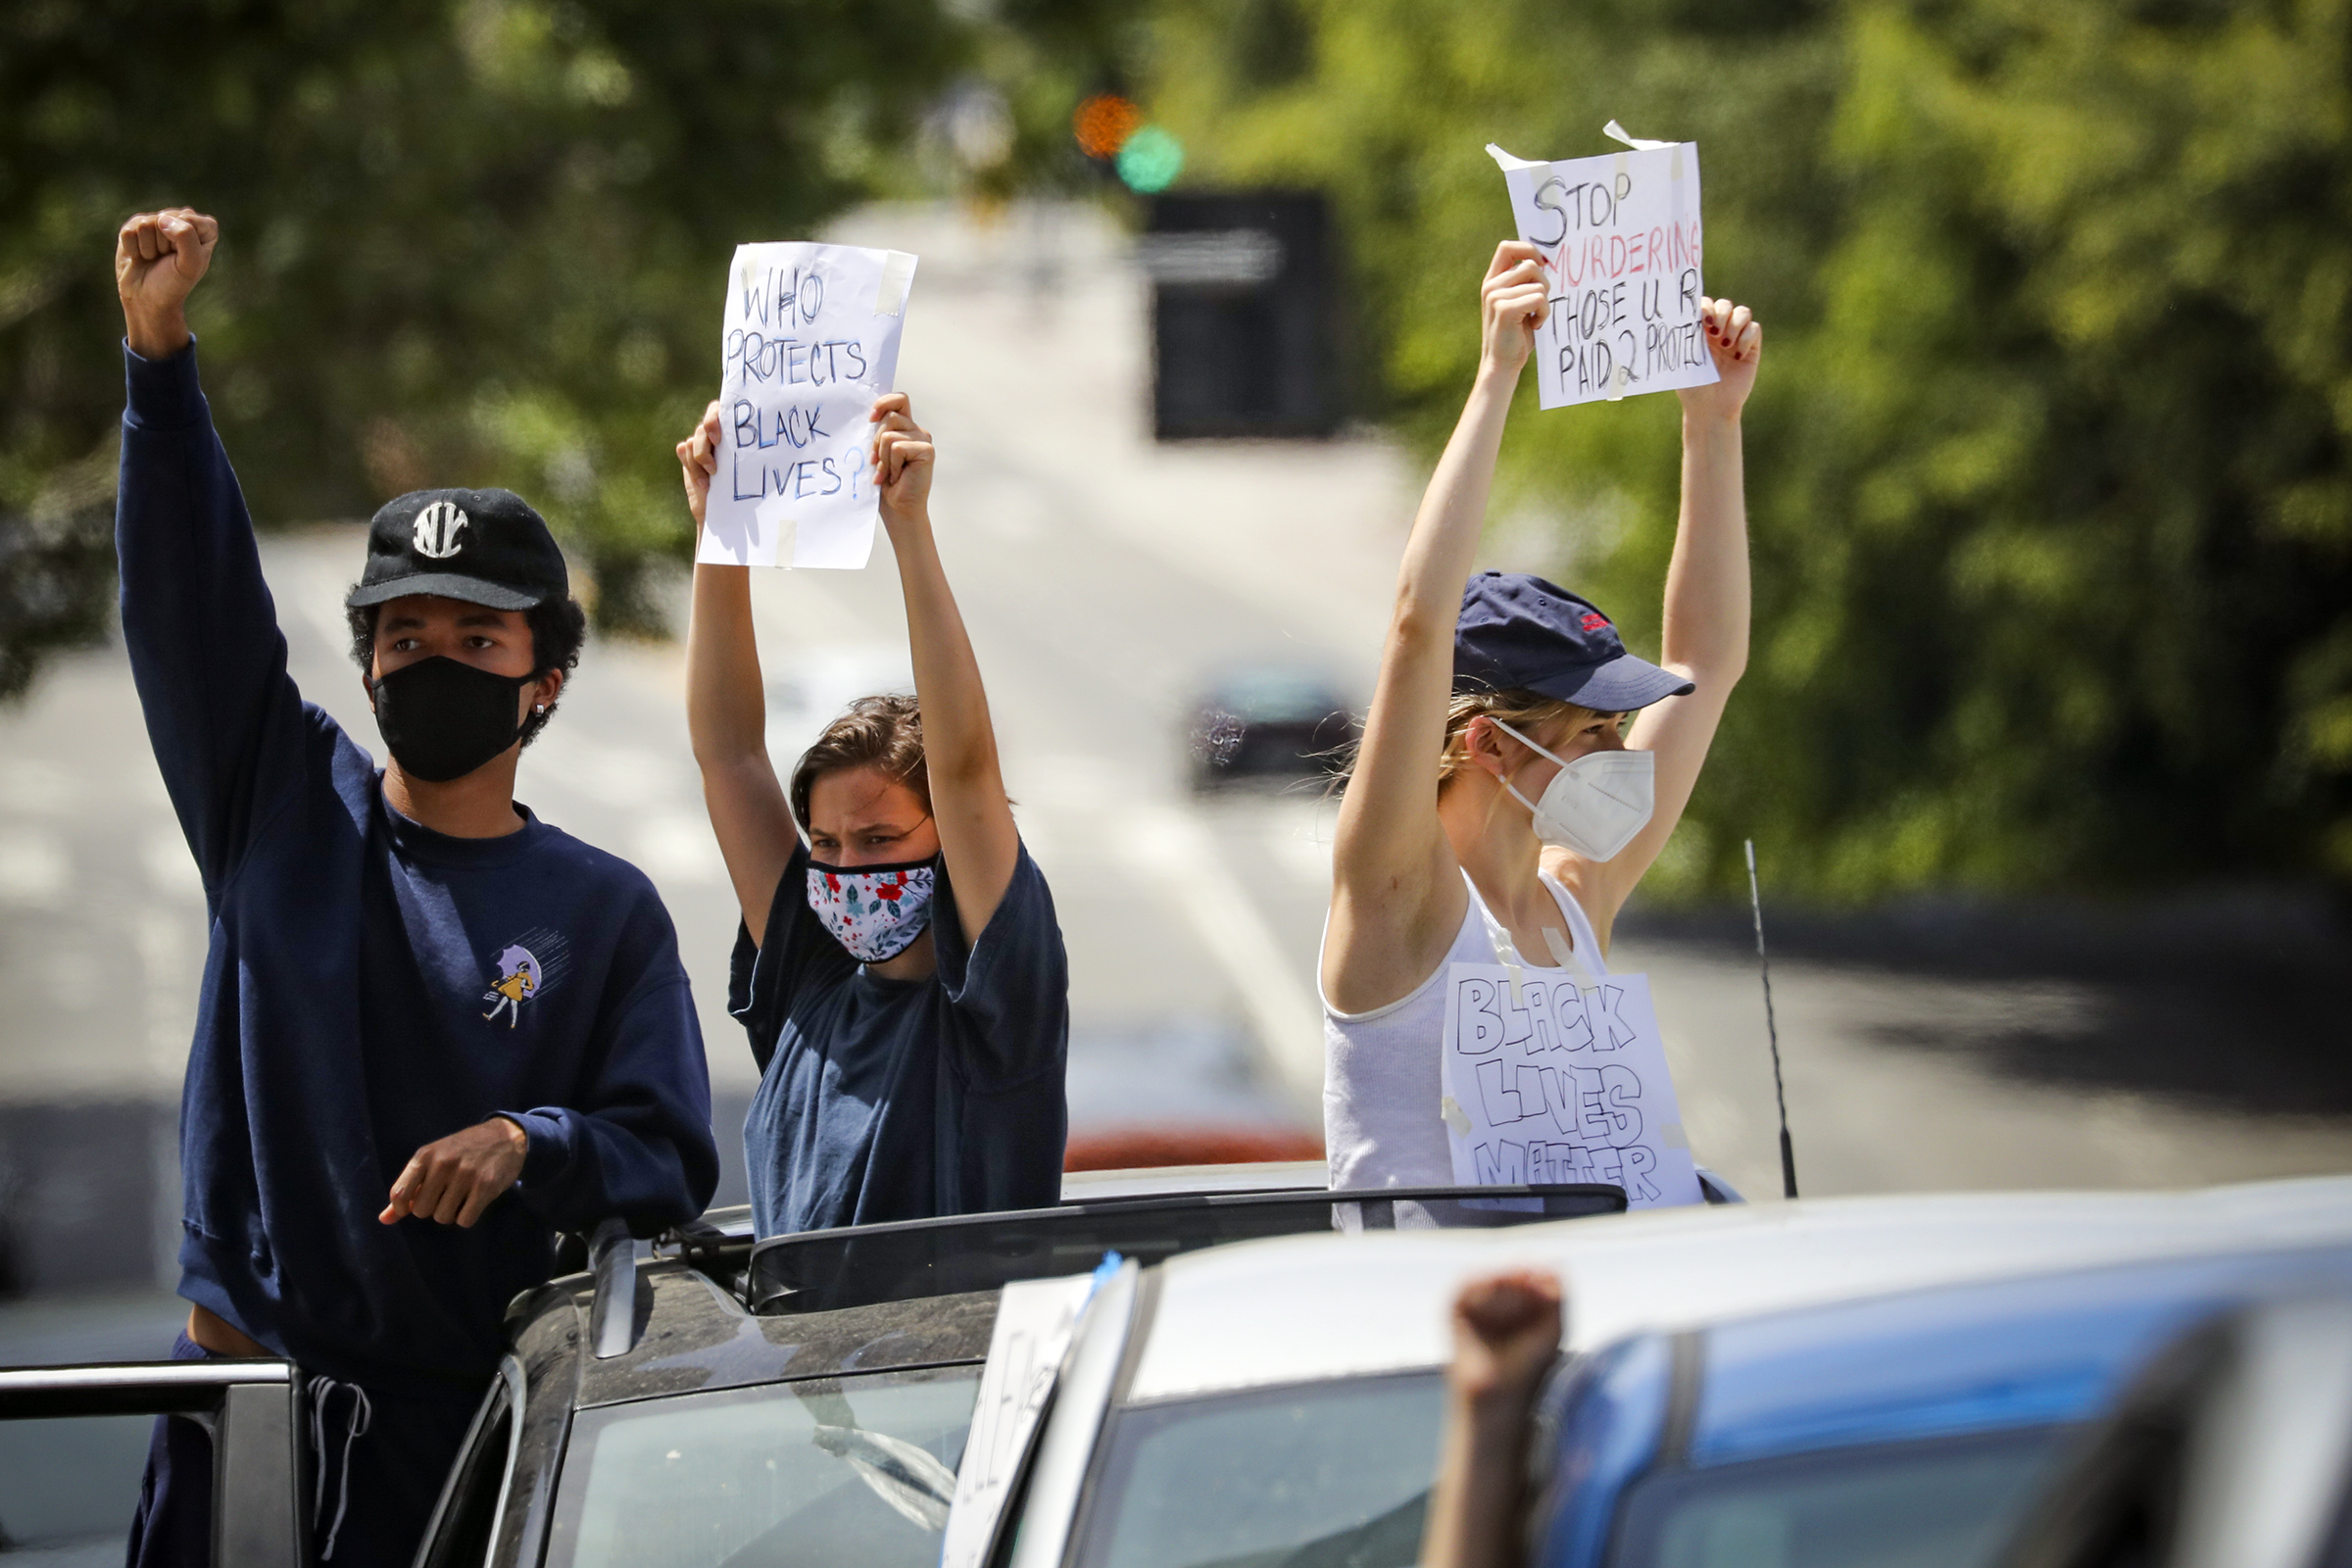 Raymond Alexander Cham Jr., Cailee Spaeny, and Ruby Cruz protesting the killing of George Floyd in front of LAPD Headquarters on Saturday, May 30, 2020, in Los Angeles, California. | Source: Getty Images